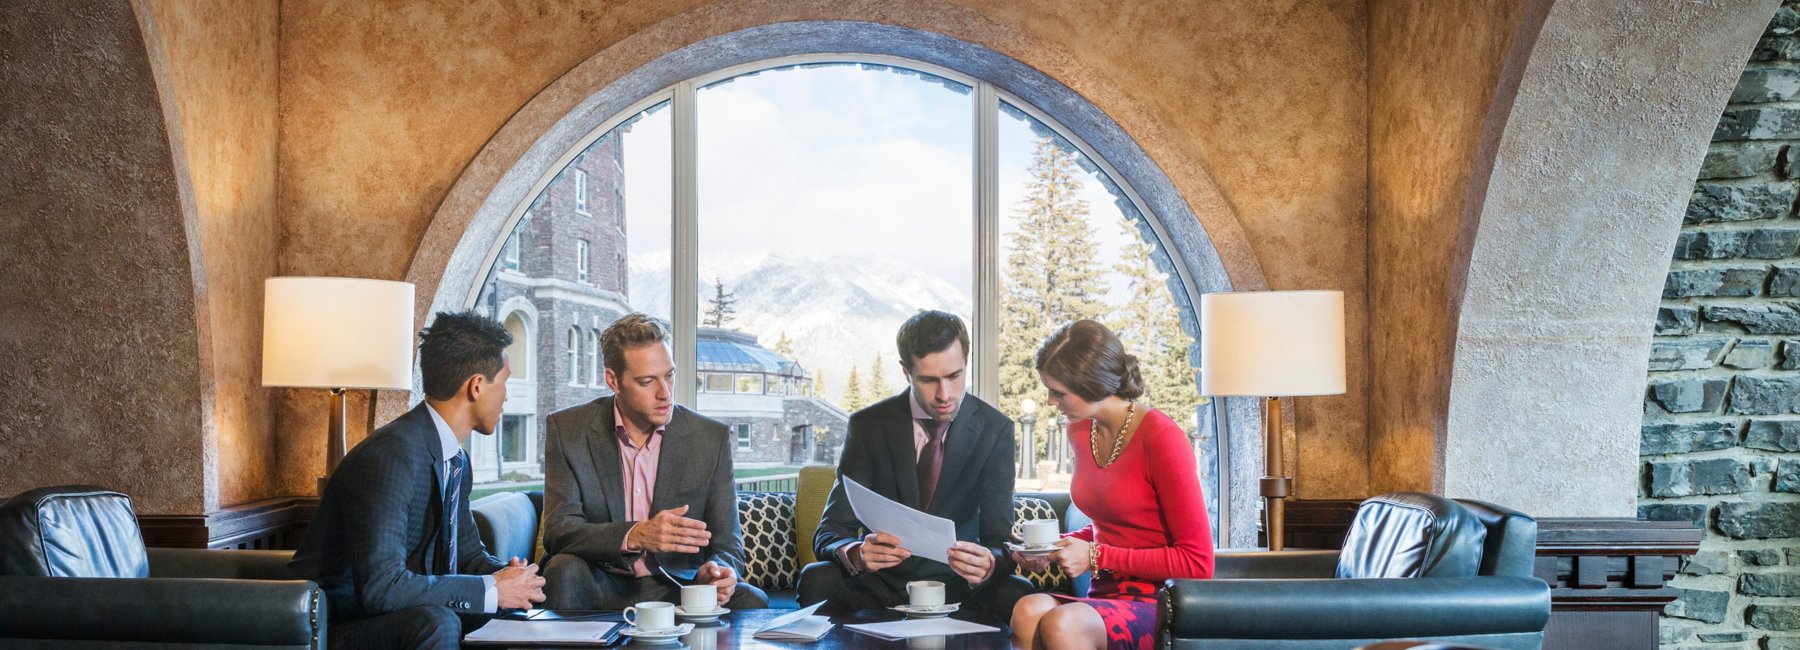 Group of four sitting and discussing business over coffee, Fairmont Banff Springs Hotel.